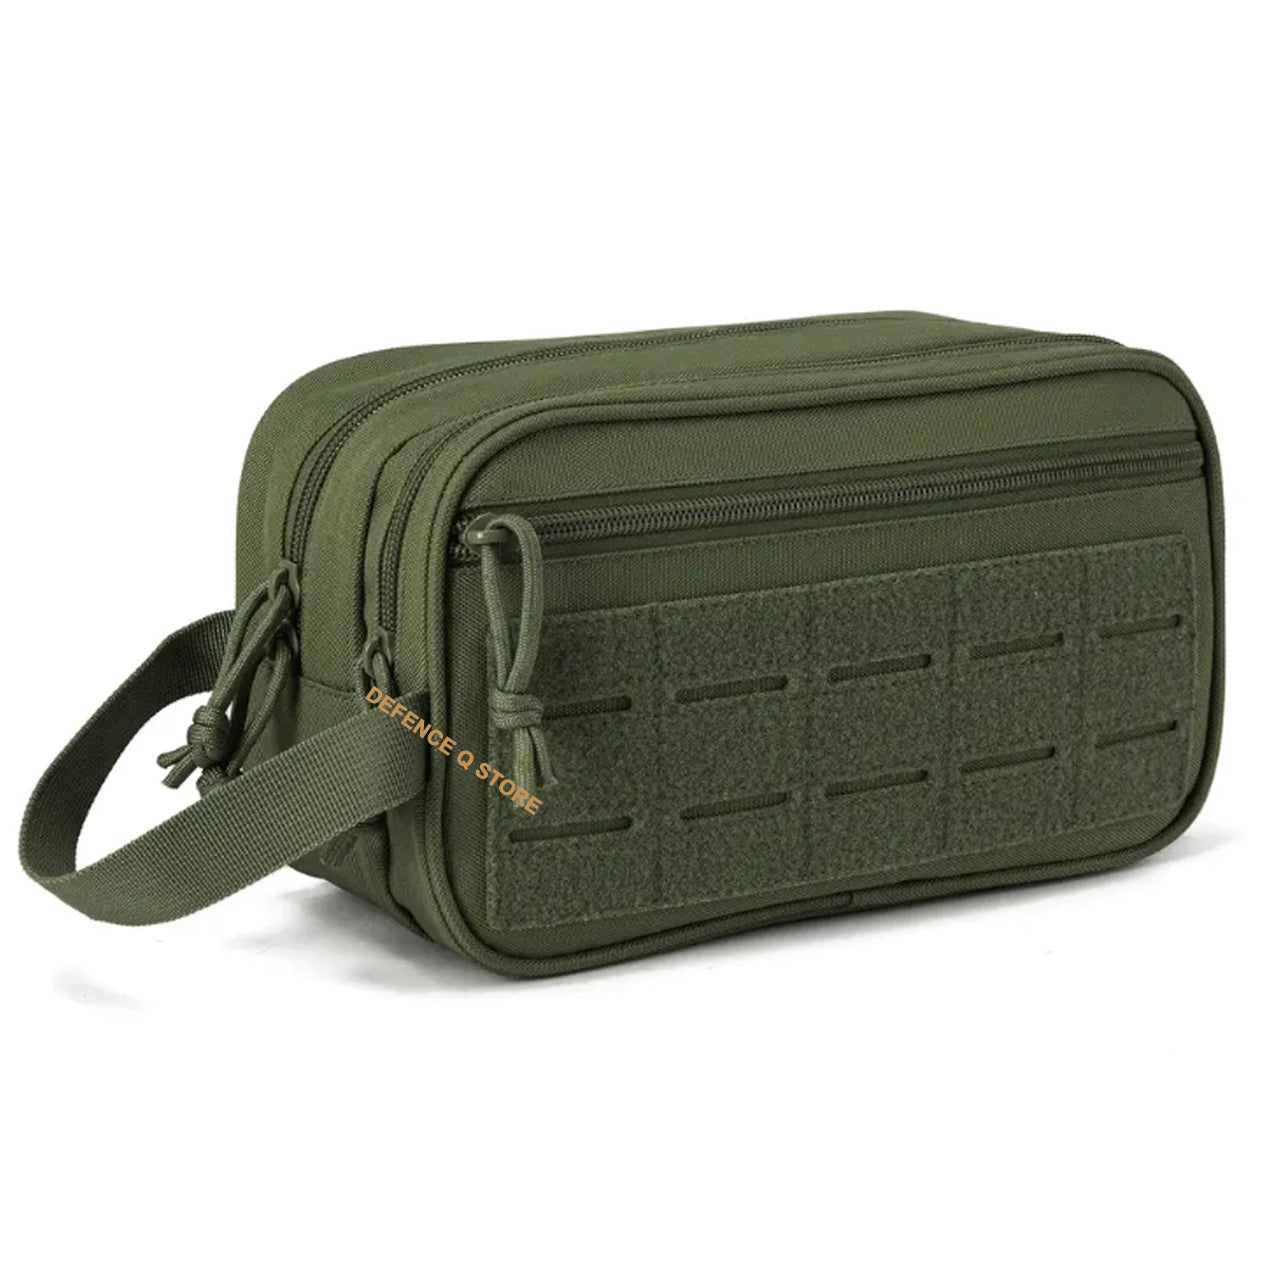 This Toiletry Bag is MOLLE capable and can be used for other gear, it's a must-have for any traveler. With dimensions of 15cm (H) x 26cm (W) x 11cm (D), it's perfect for storing toiletries and accessories. Made from 900D fabric material, it boasts a sleek and durable design. www.defenceqstore.com.au